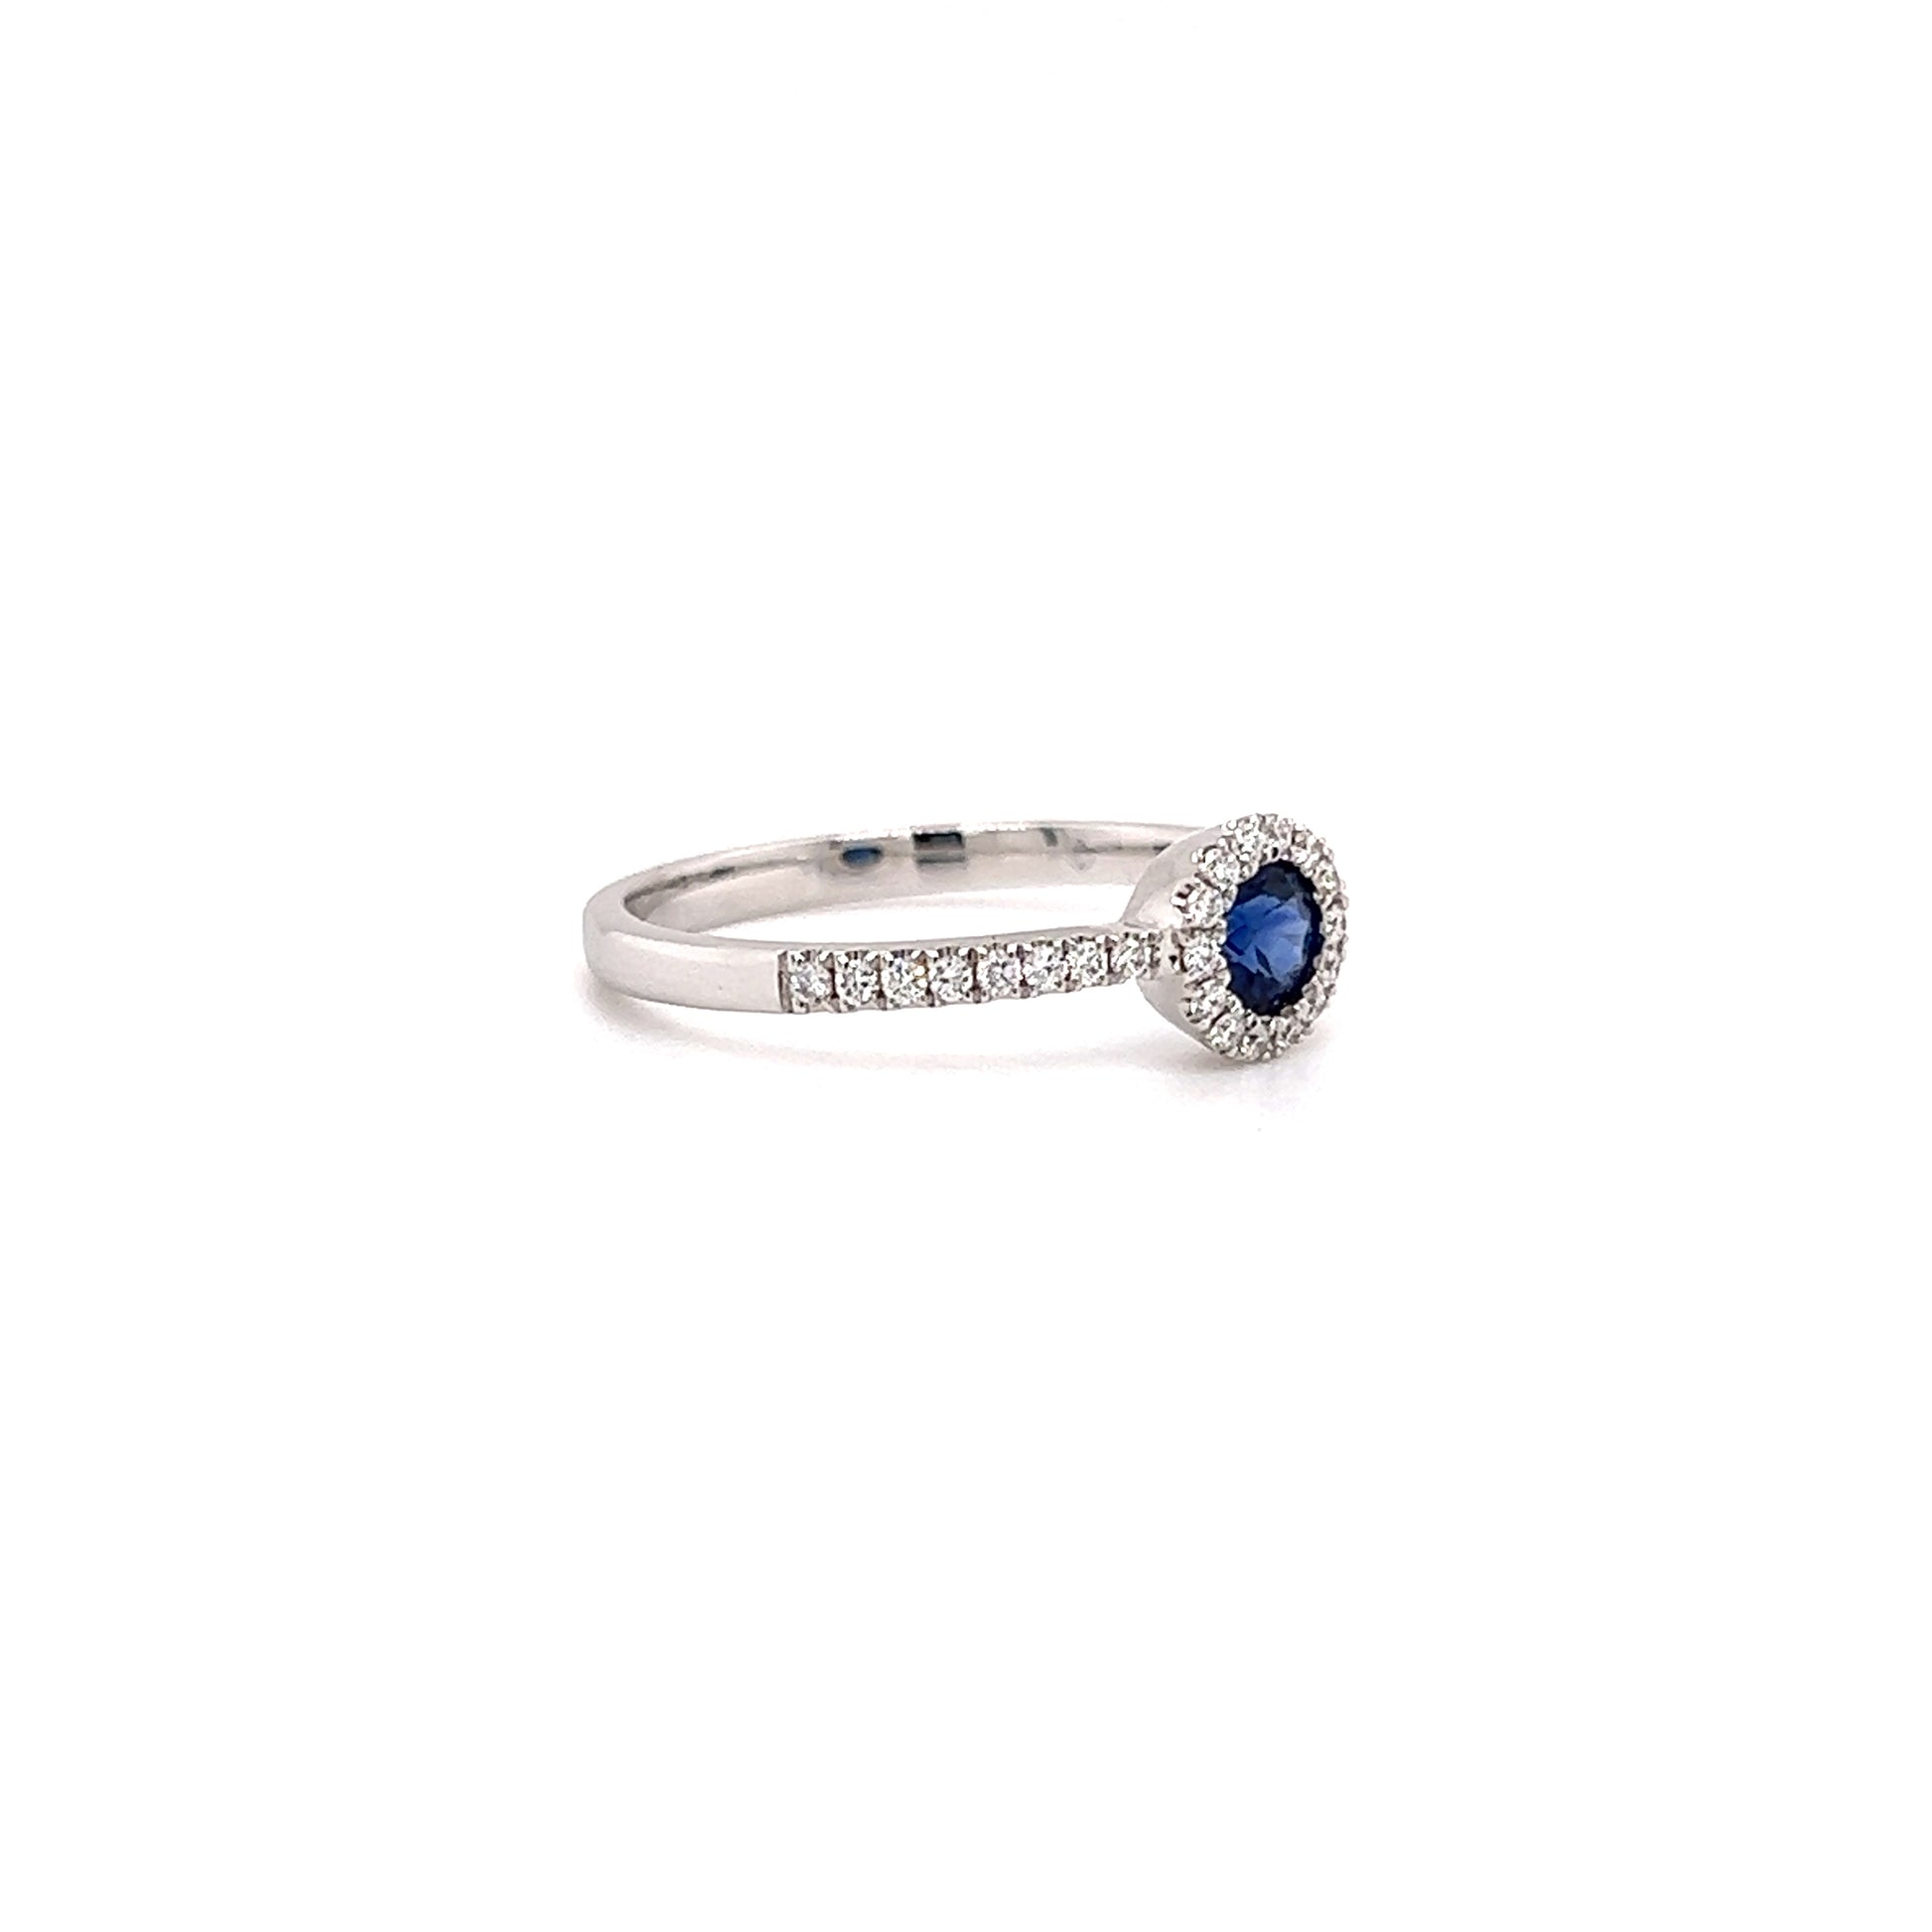 Sapphire Bezel Ring with Diamond Halo in 14K While Gold Left Side View